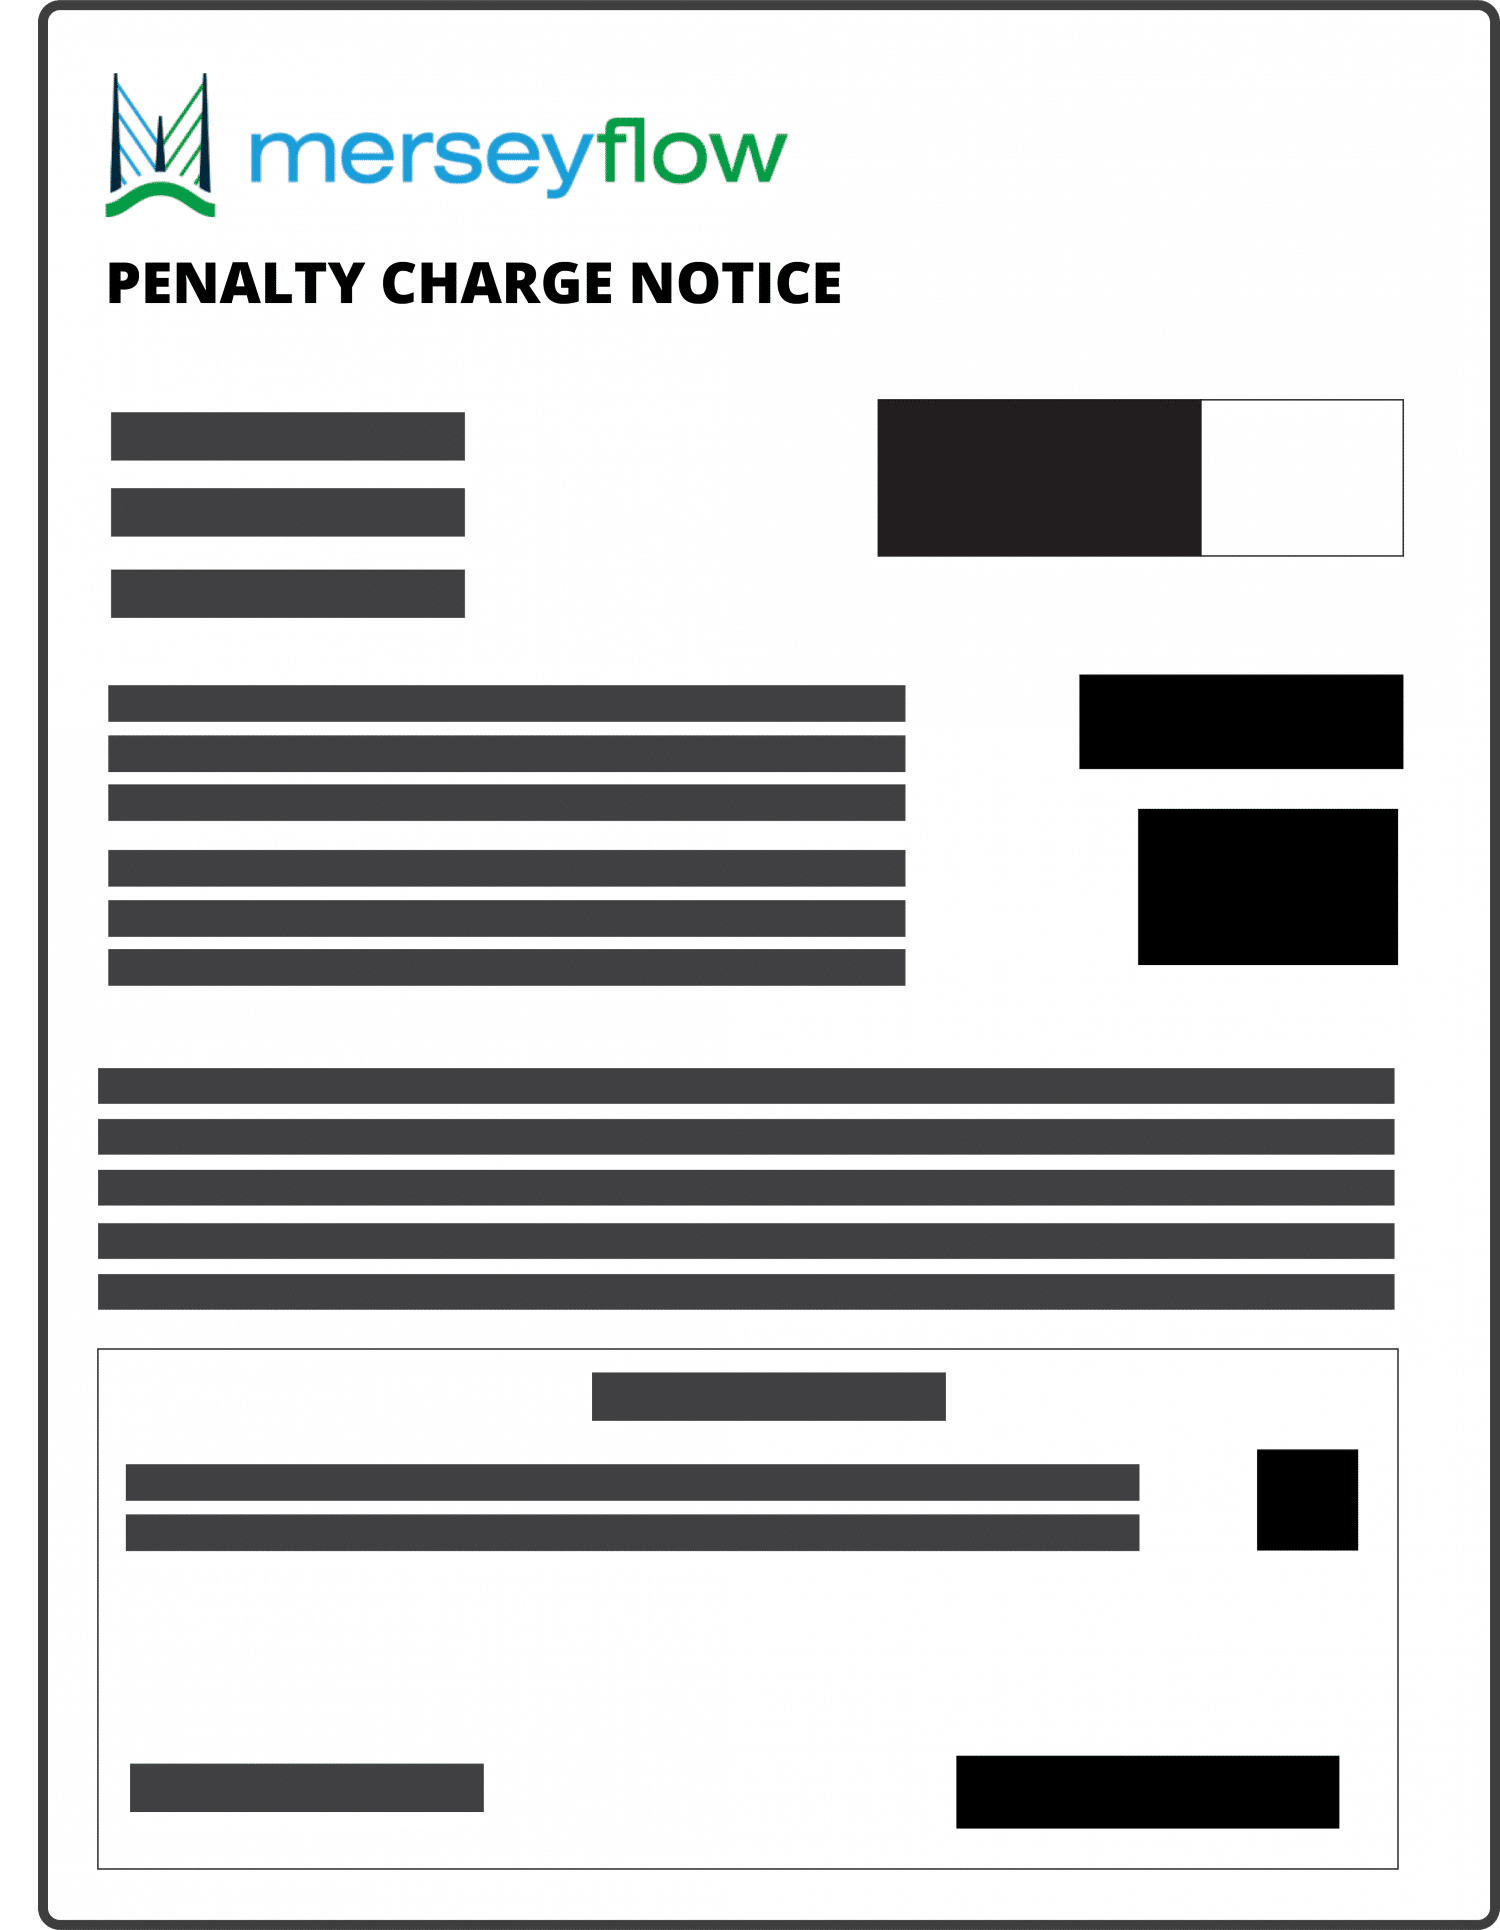 Graphic showing a Merseyflow Penalty Charge Notice (PCN)